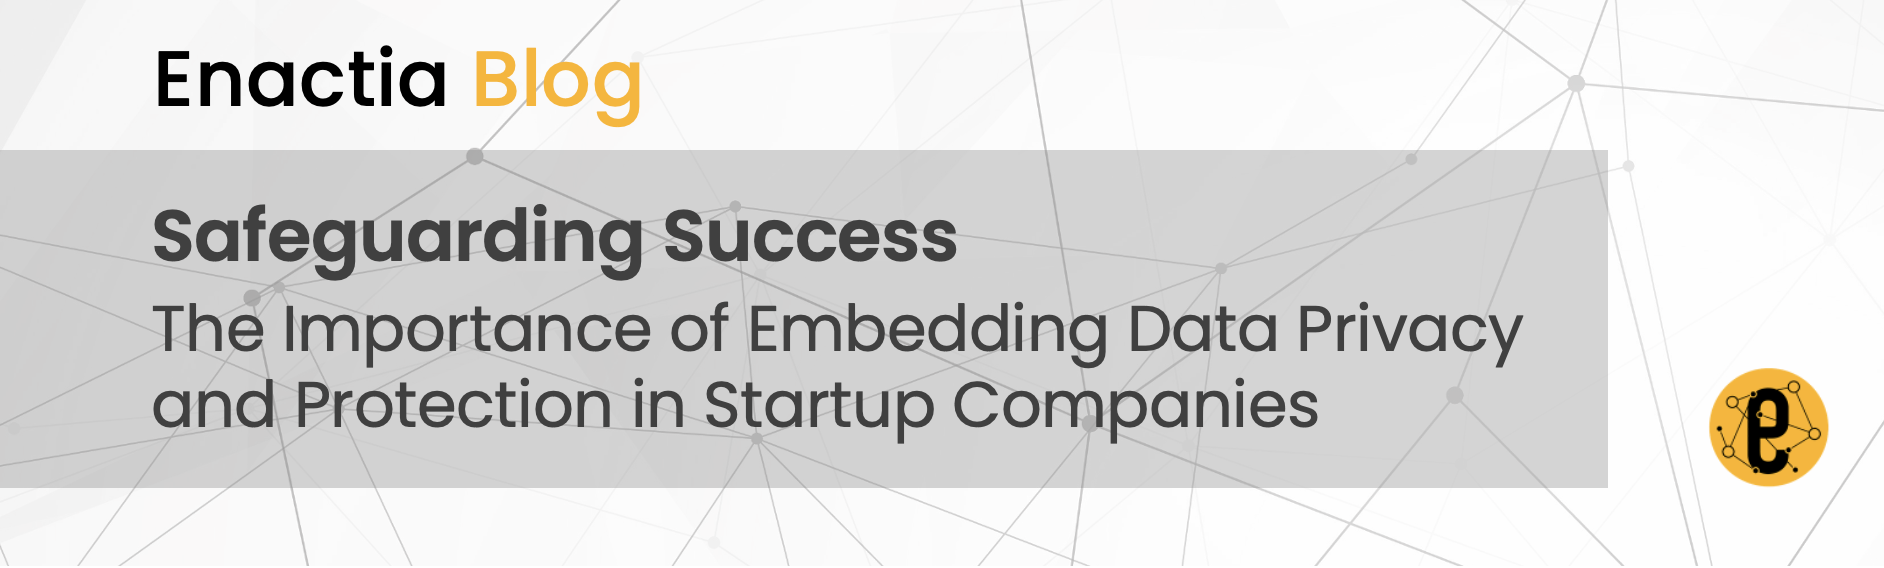 Safeguarding Success: The Importance of Embedding Data Privacy and Protection in Startup Companies